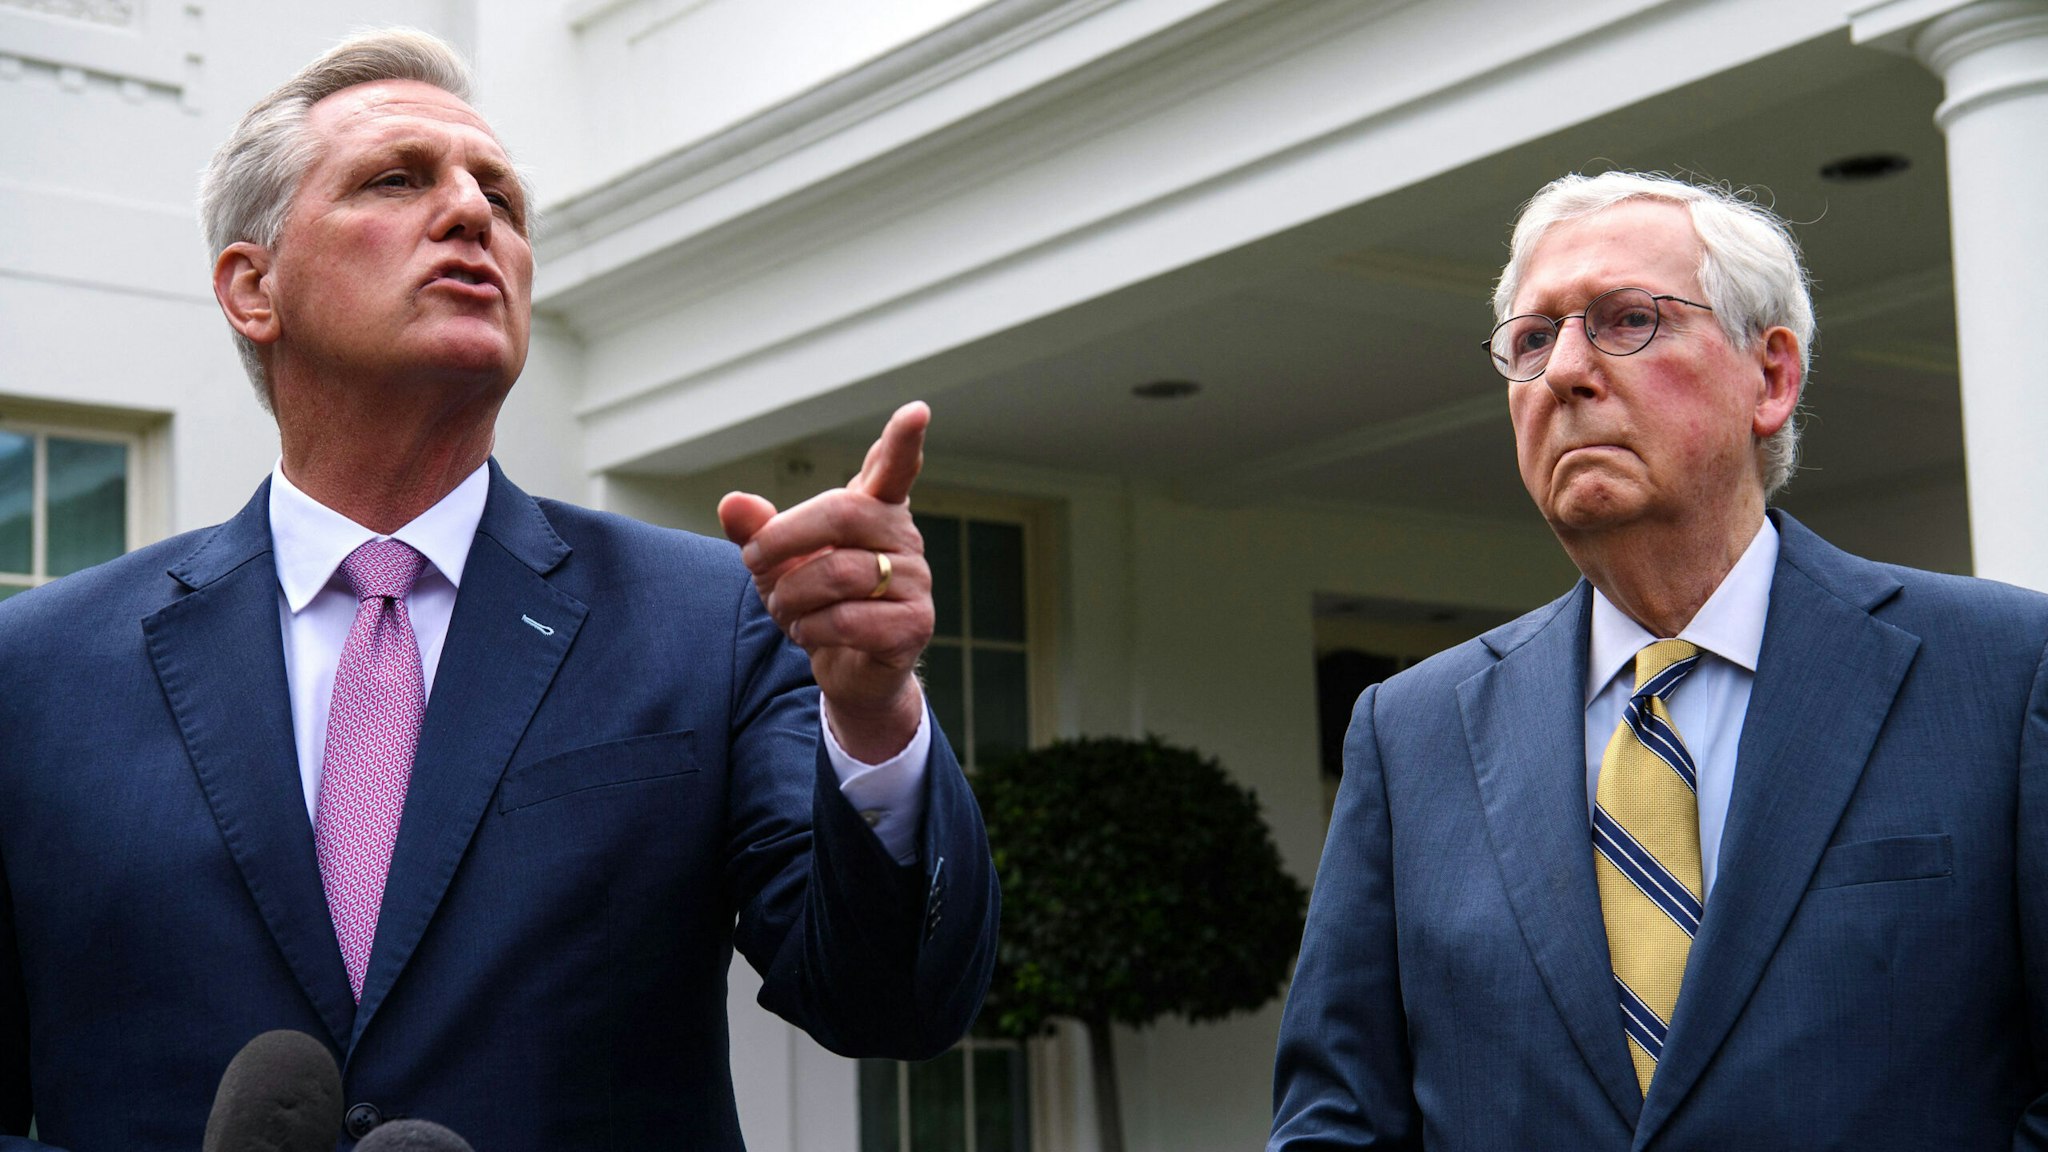 US Senate Minority Leader Mitch McConnell(R)listens as House Minority Leader Kevin McCarthy speaks to the press, following their meeting with US President Joe Biden and Democratic congressional leaders at the White House in Washington, DC, on May 12, 2021.